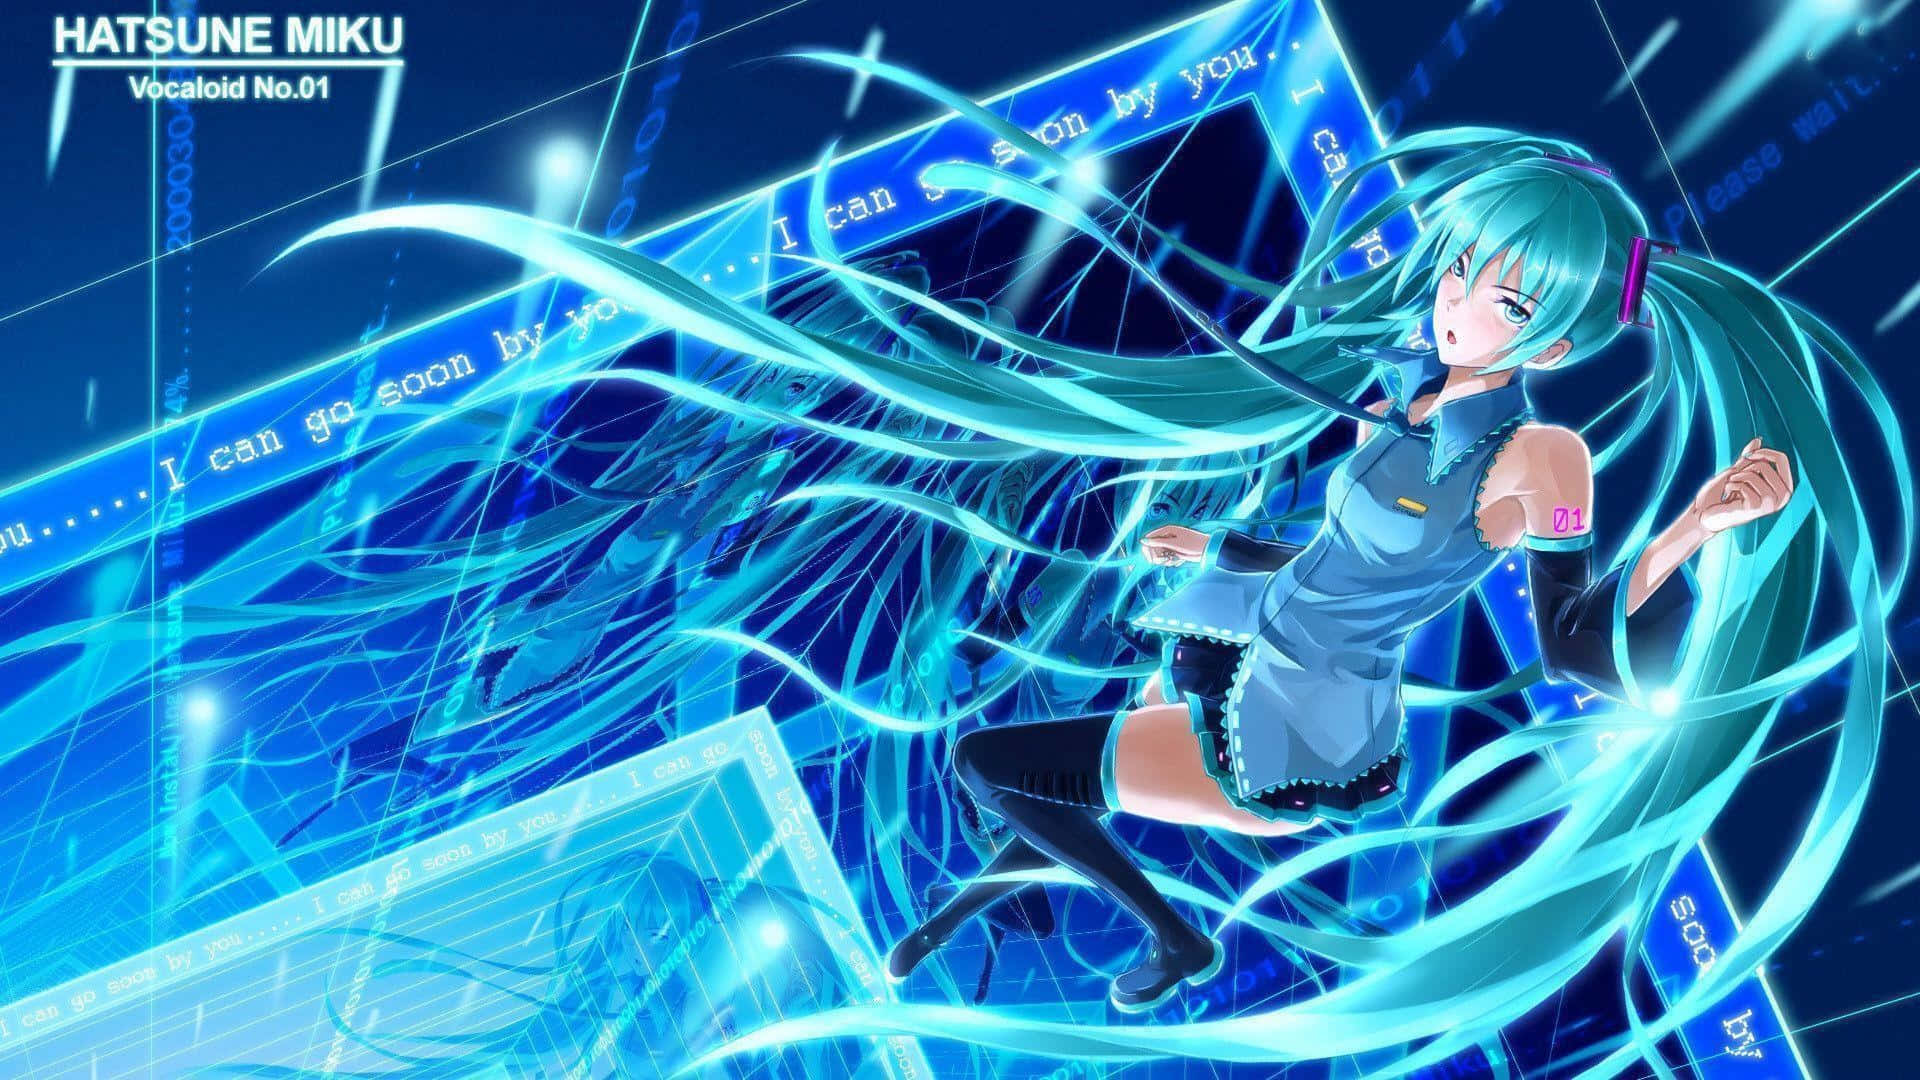 Hatsune Miku warming up her vocal cords